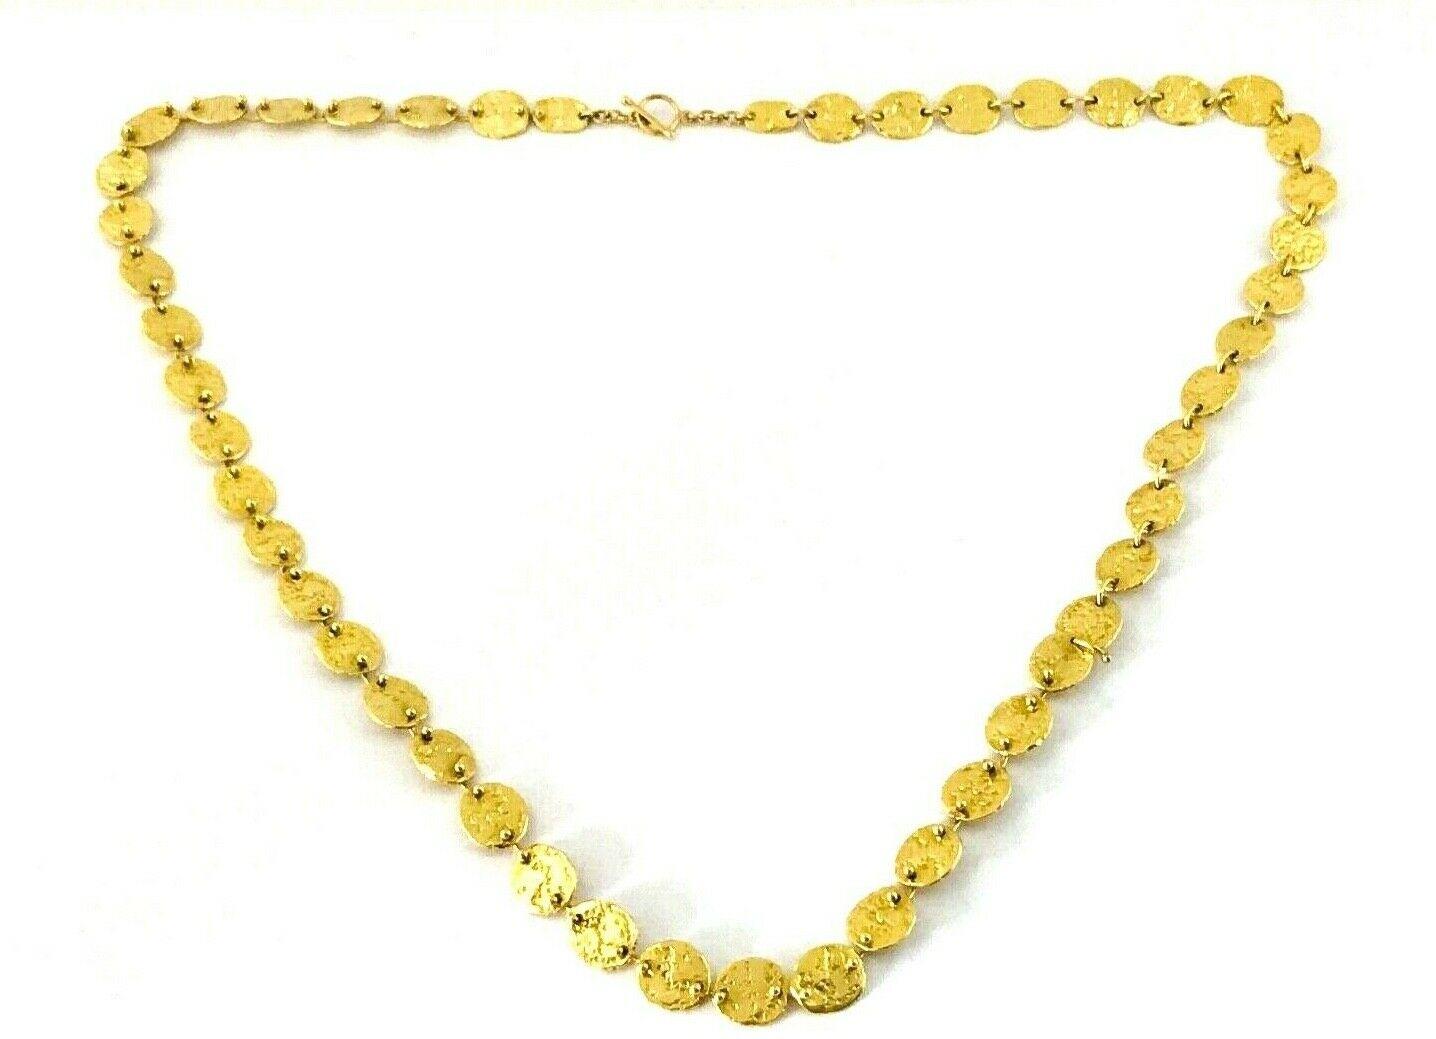 18k hammered yellow gold chain necklace by Jennifer Meyer. Consists of hammered scales connected with each other by the tiny gold wires. Features toggle clasp. Stamped with the Jennifer Meyer maker's mark and a hallmark for 18k gold.
Measurements: